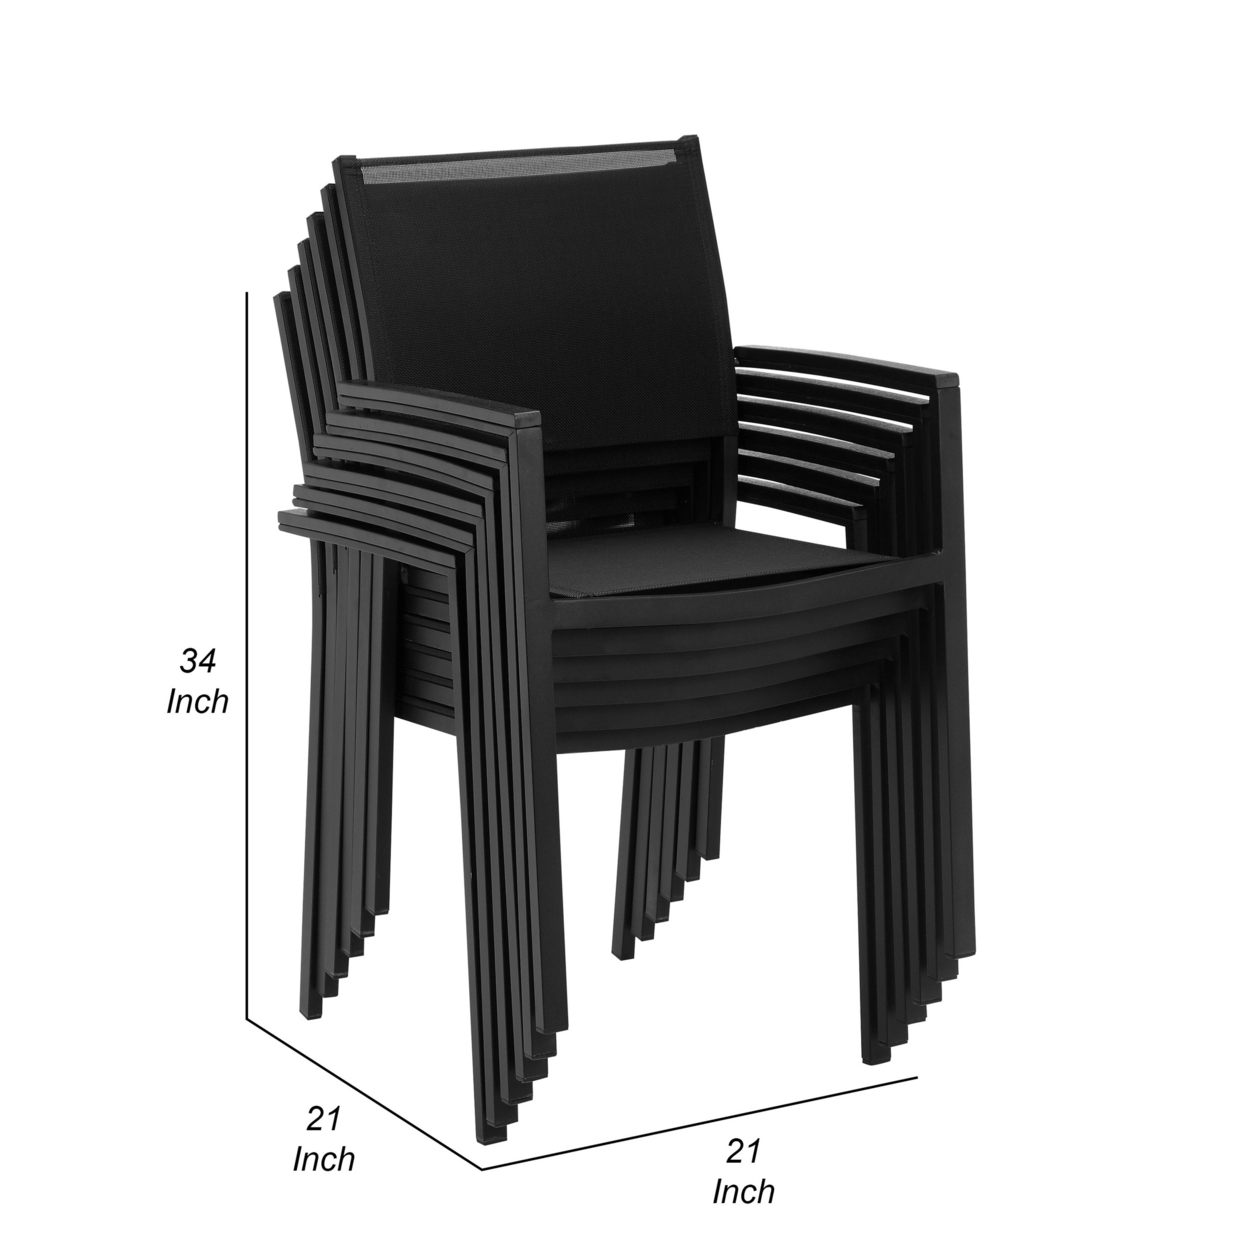 Fifi 21 Inch Set of 6 Dining Chairs, Black Aluminum Frame, Easily Stackable- Saltoro Sherpi - image 5 of 5